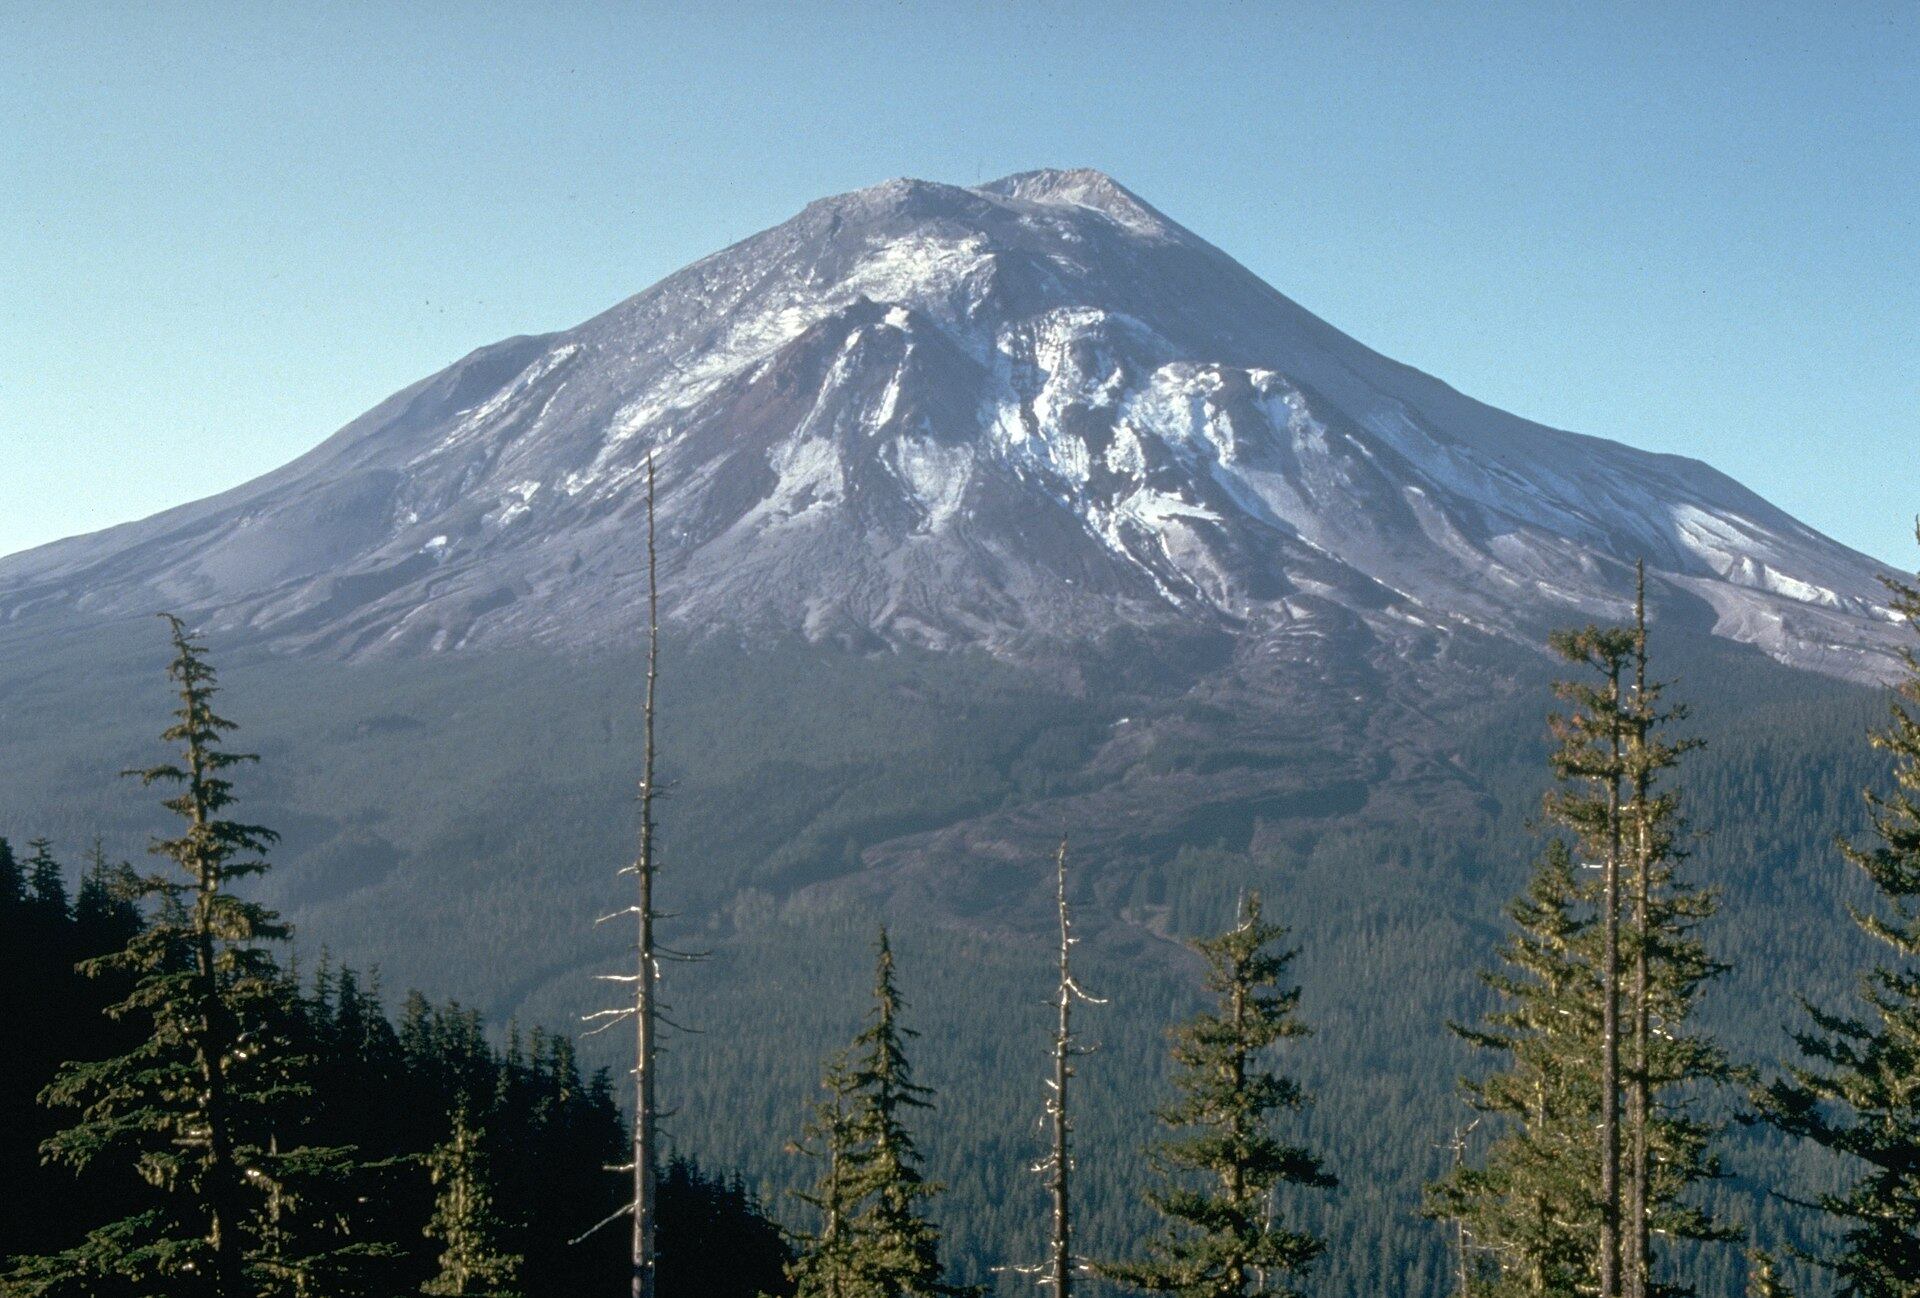 Mount St. Helens the day before the eruption, May 17, 1980, as seen from the observation point known as Coldwater 2.